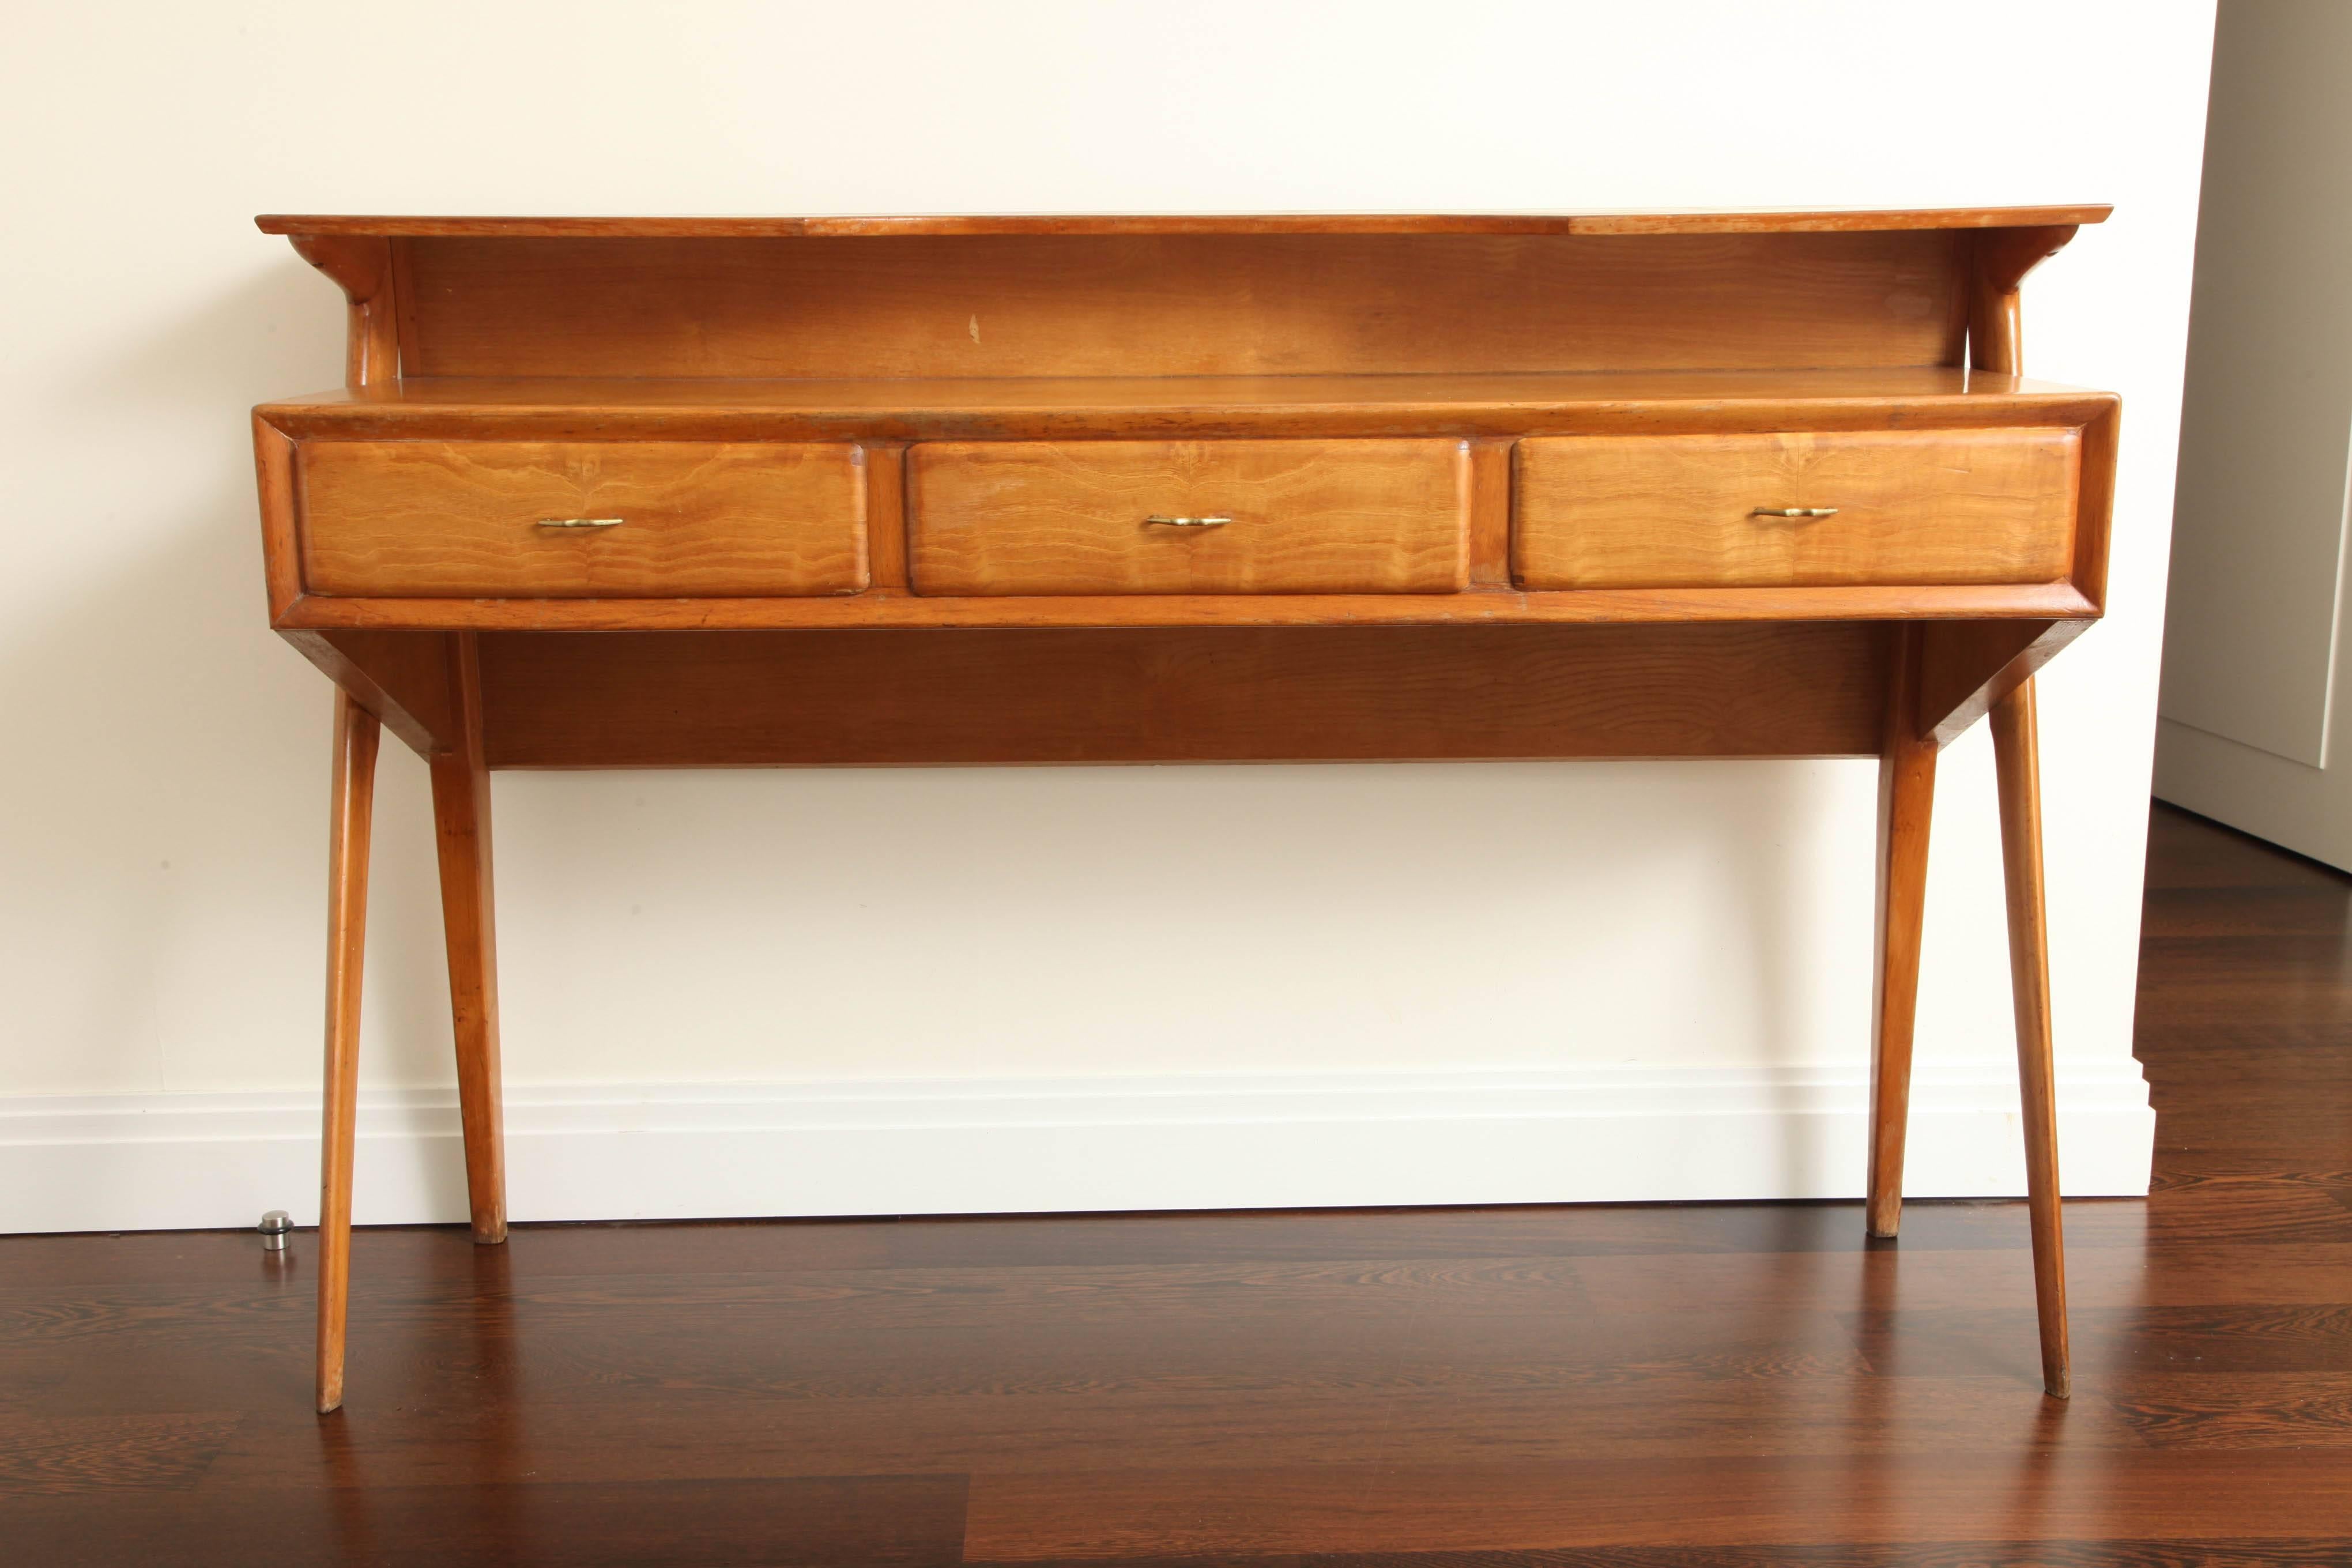 Fitted with three frieze drawers with brass handles.